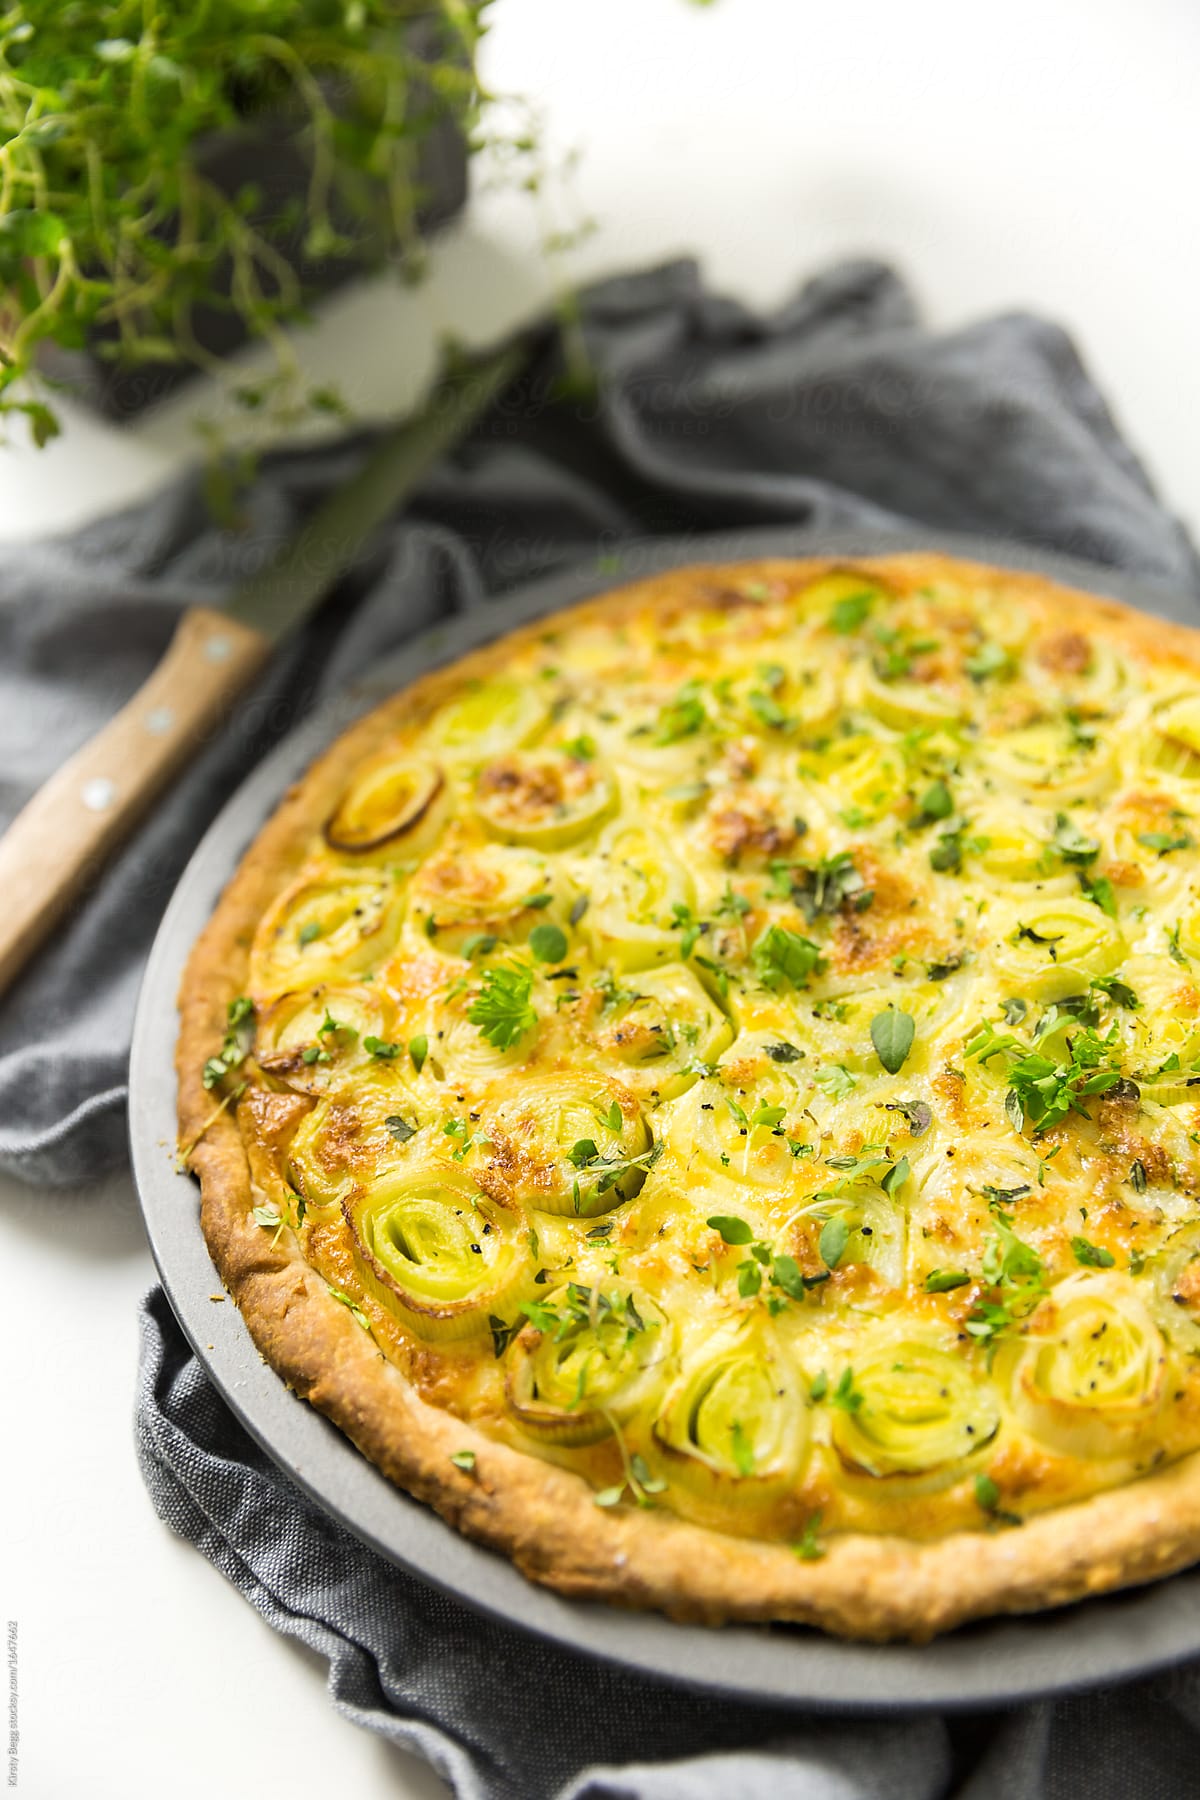 Cheese and leek tart with herbs